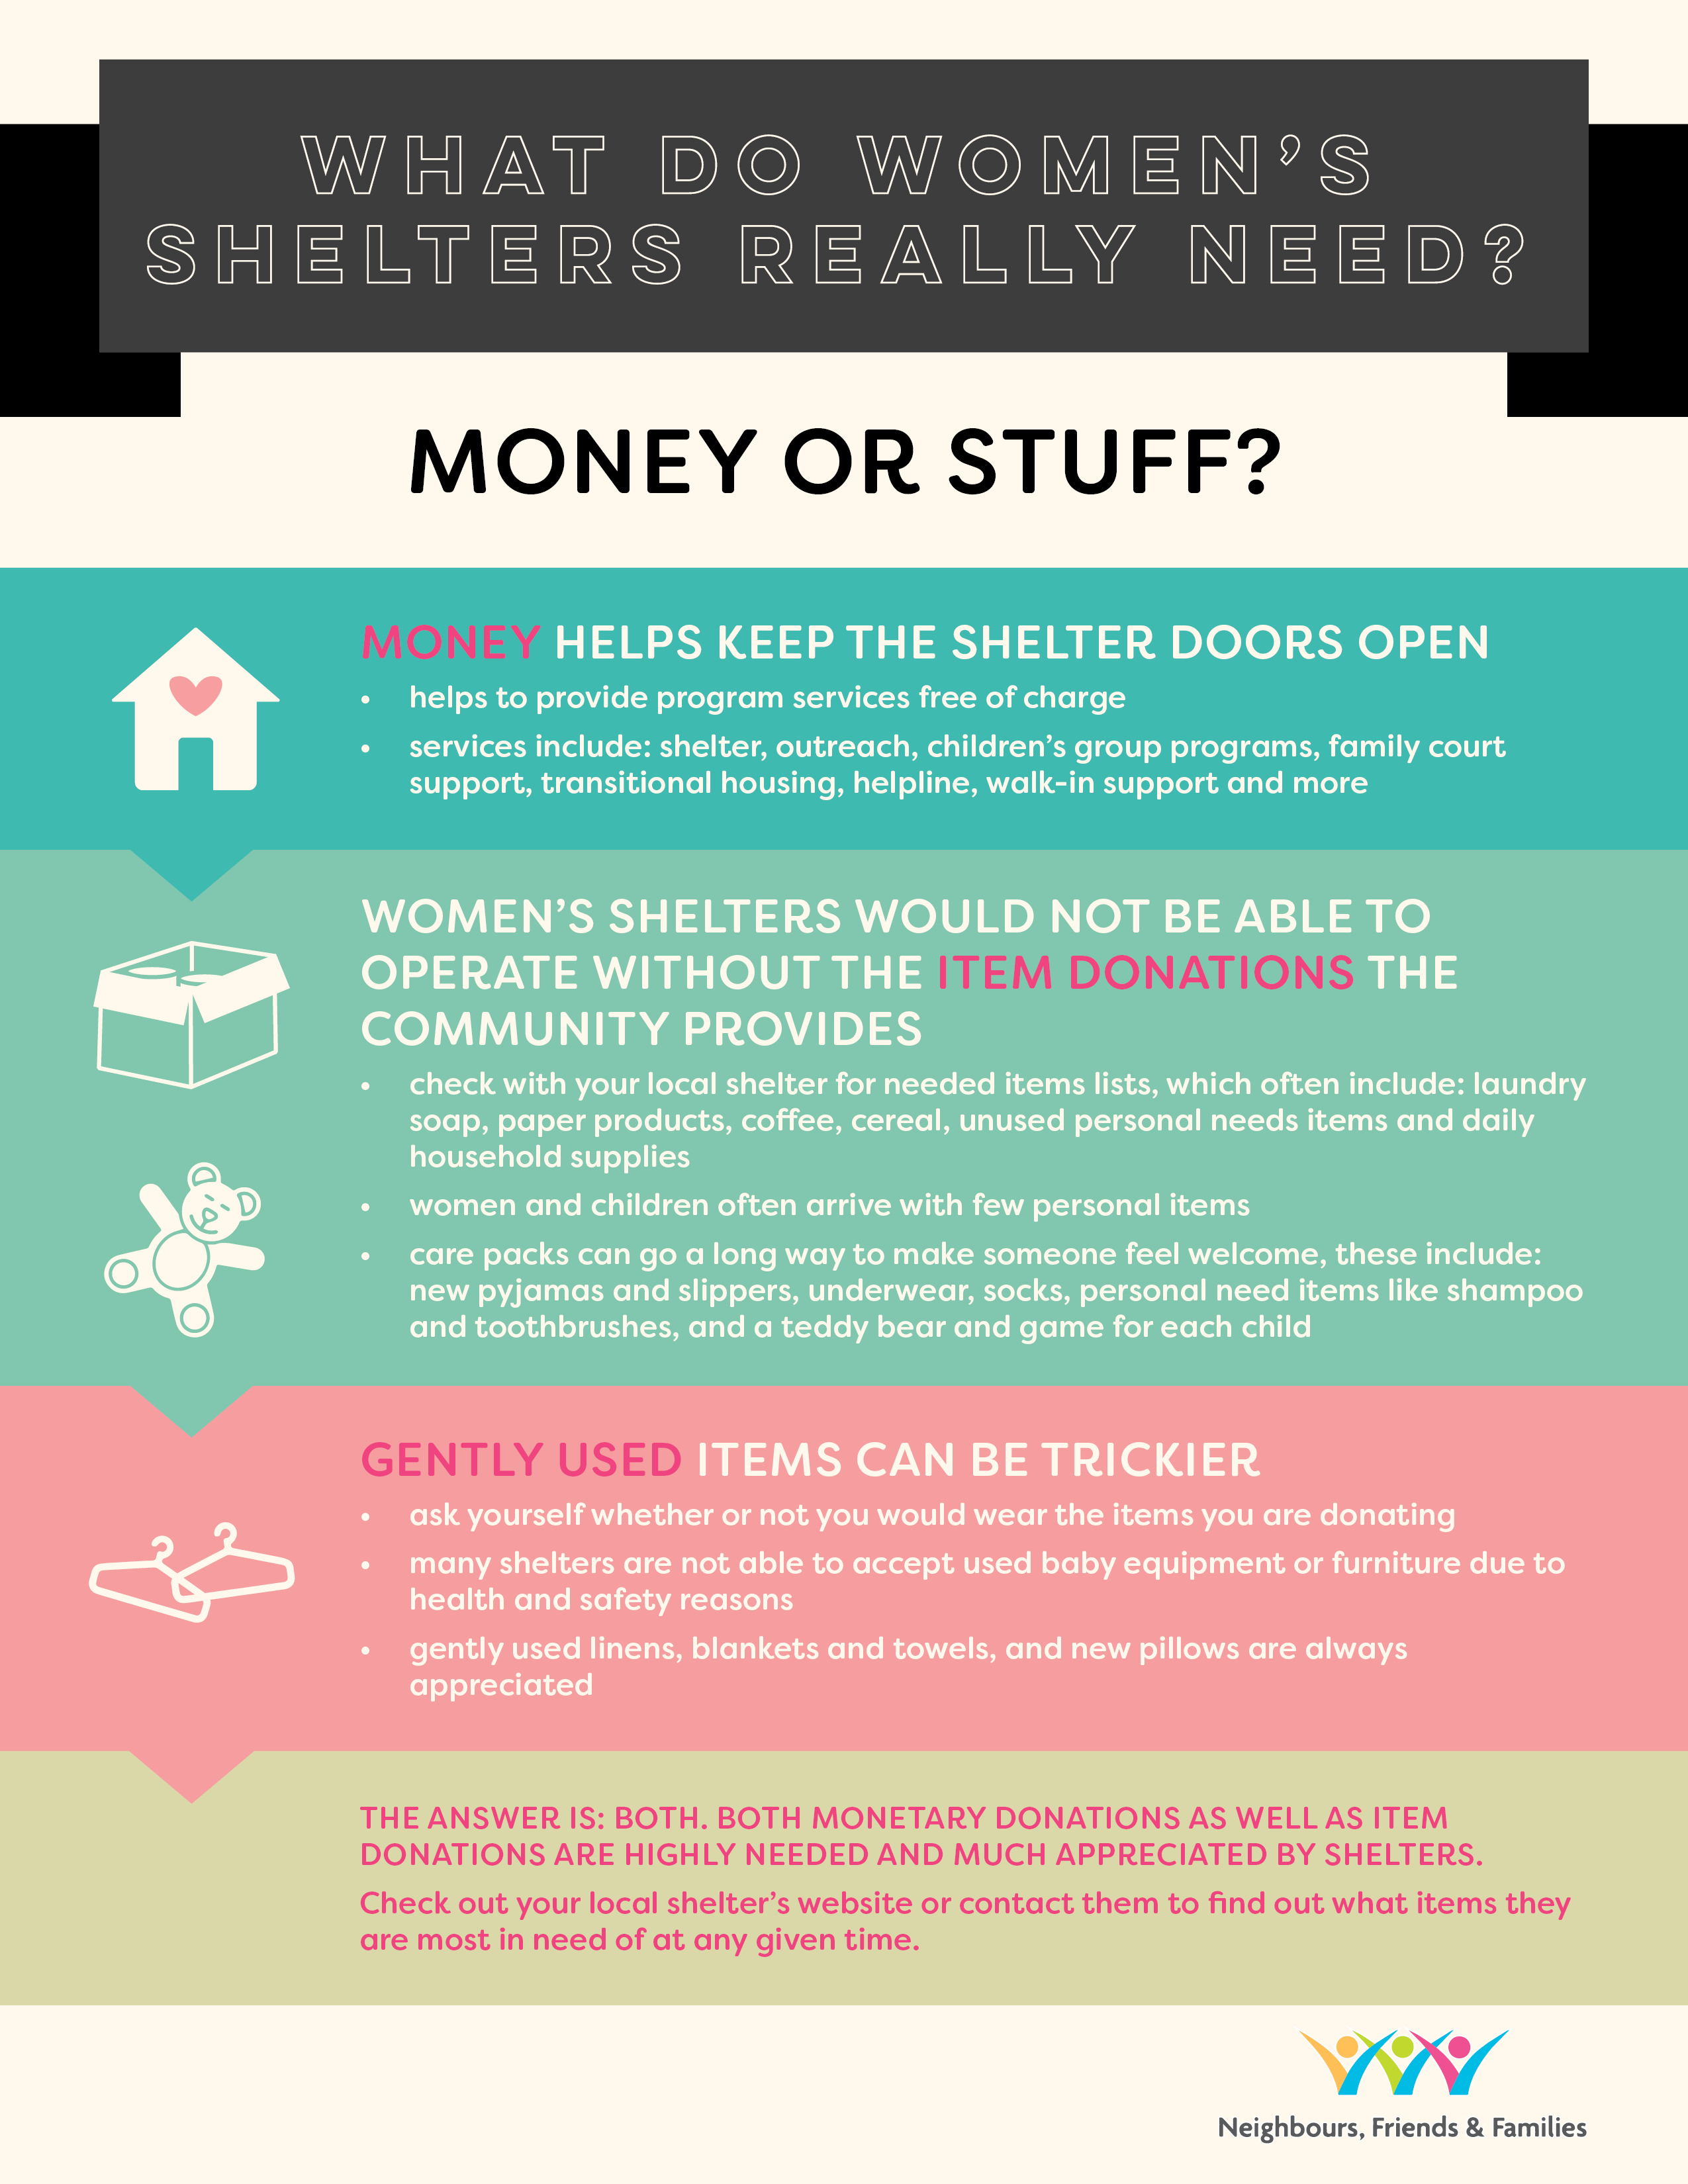 CREVAWC on X: Do women's shelters need money or items? The answer